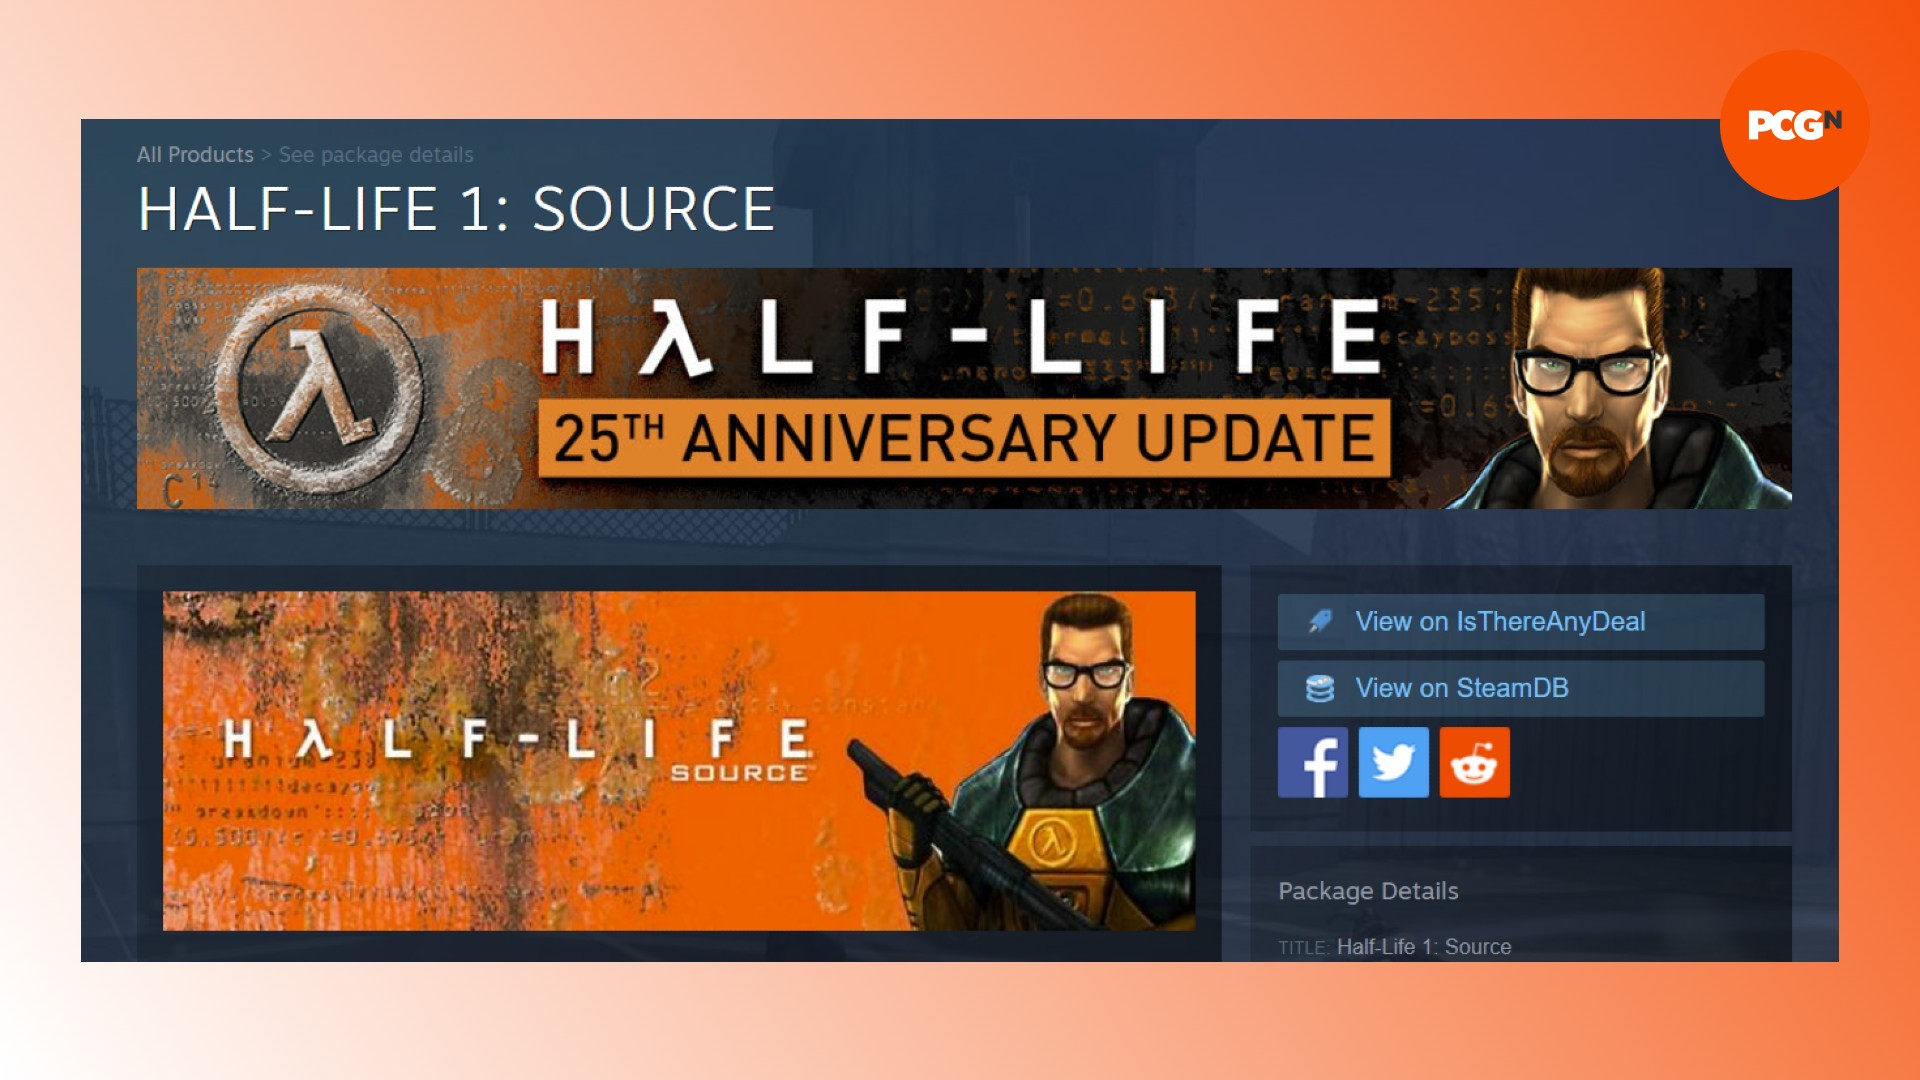 Half-Life Source Steam delisted: A Steam store page for FPS game Half-Life Source